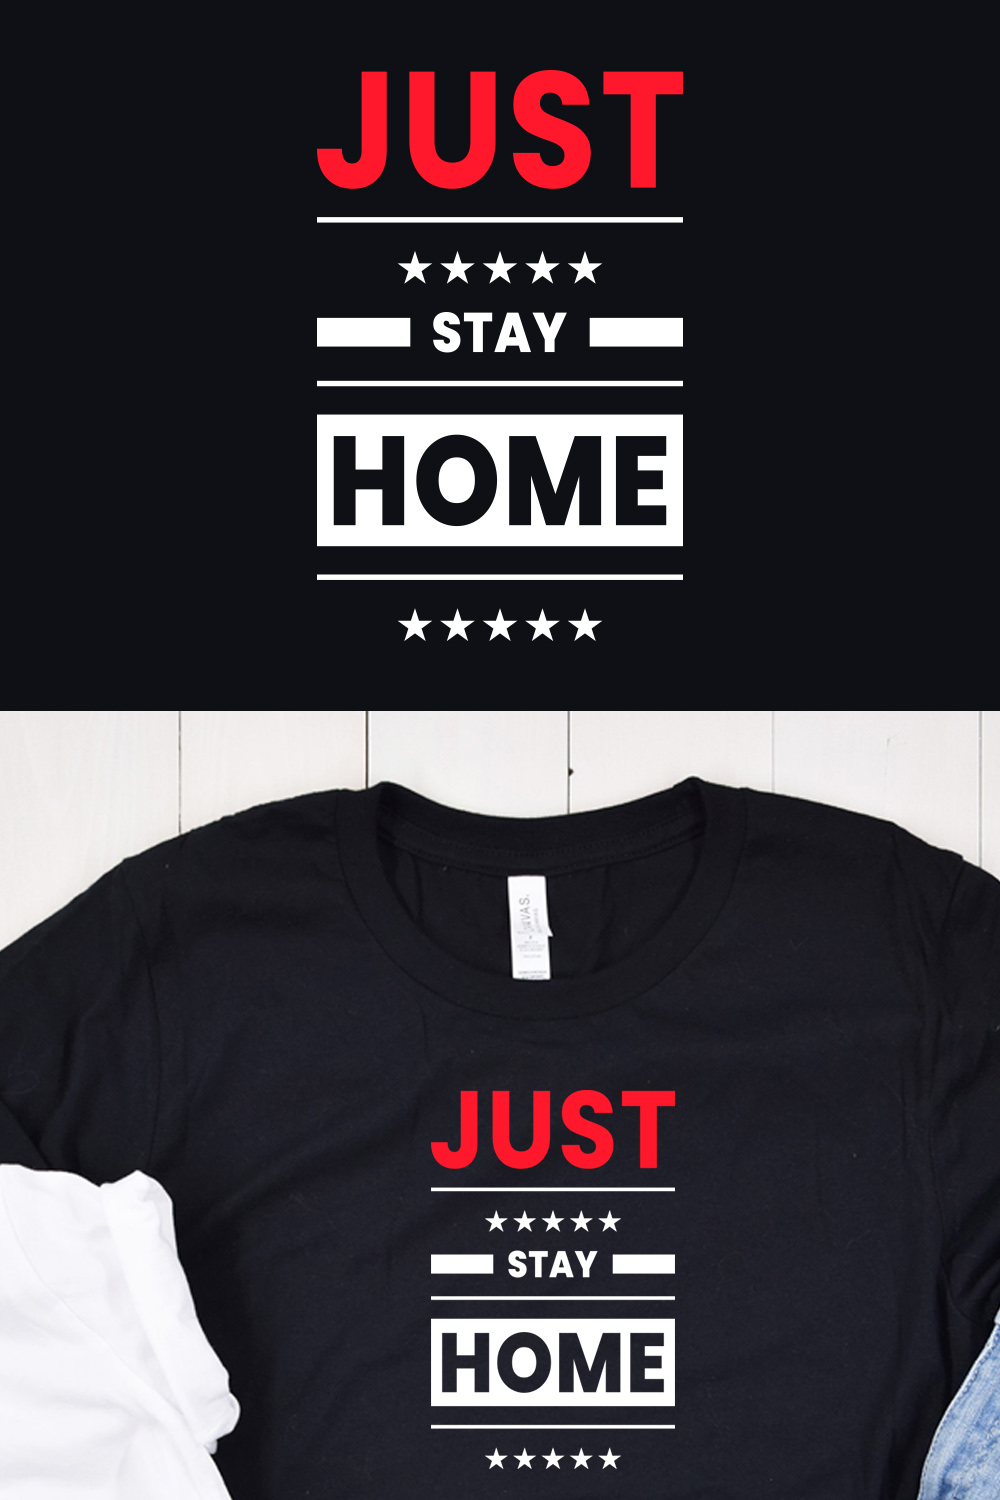 Just Stay Home Typography T-Shirt Design Pinterest image.